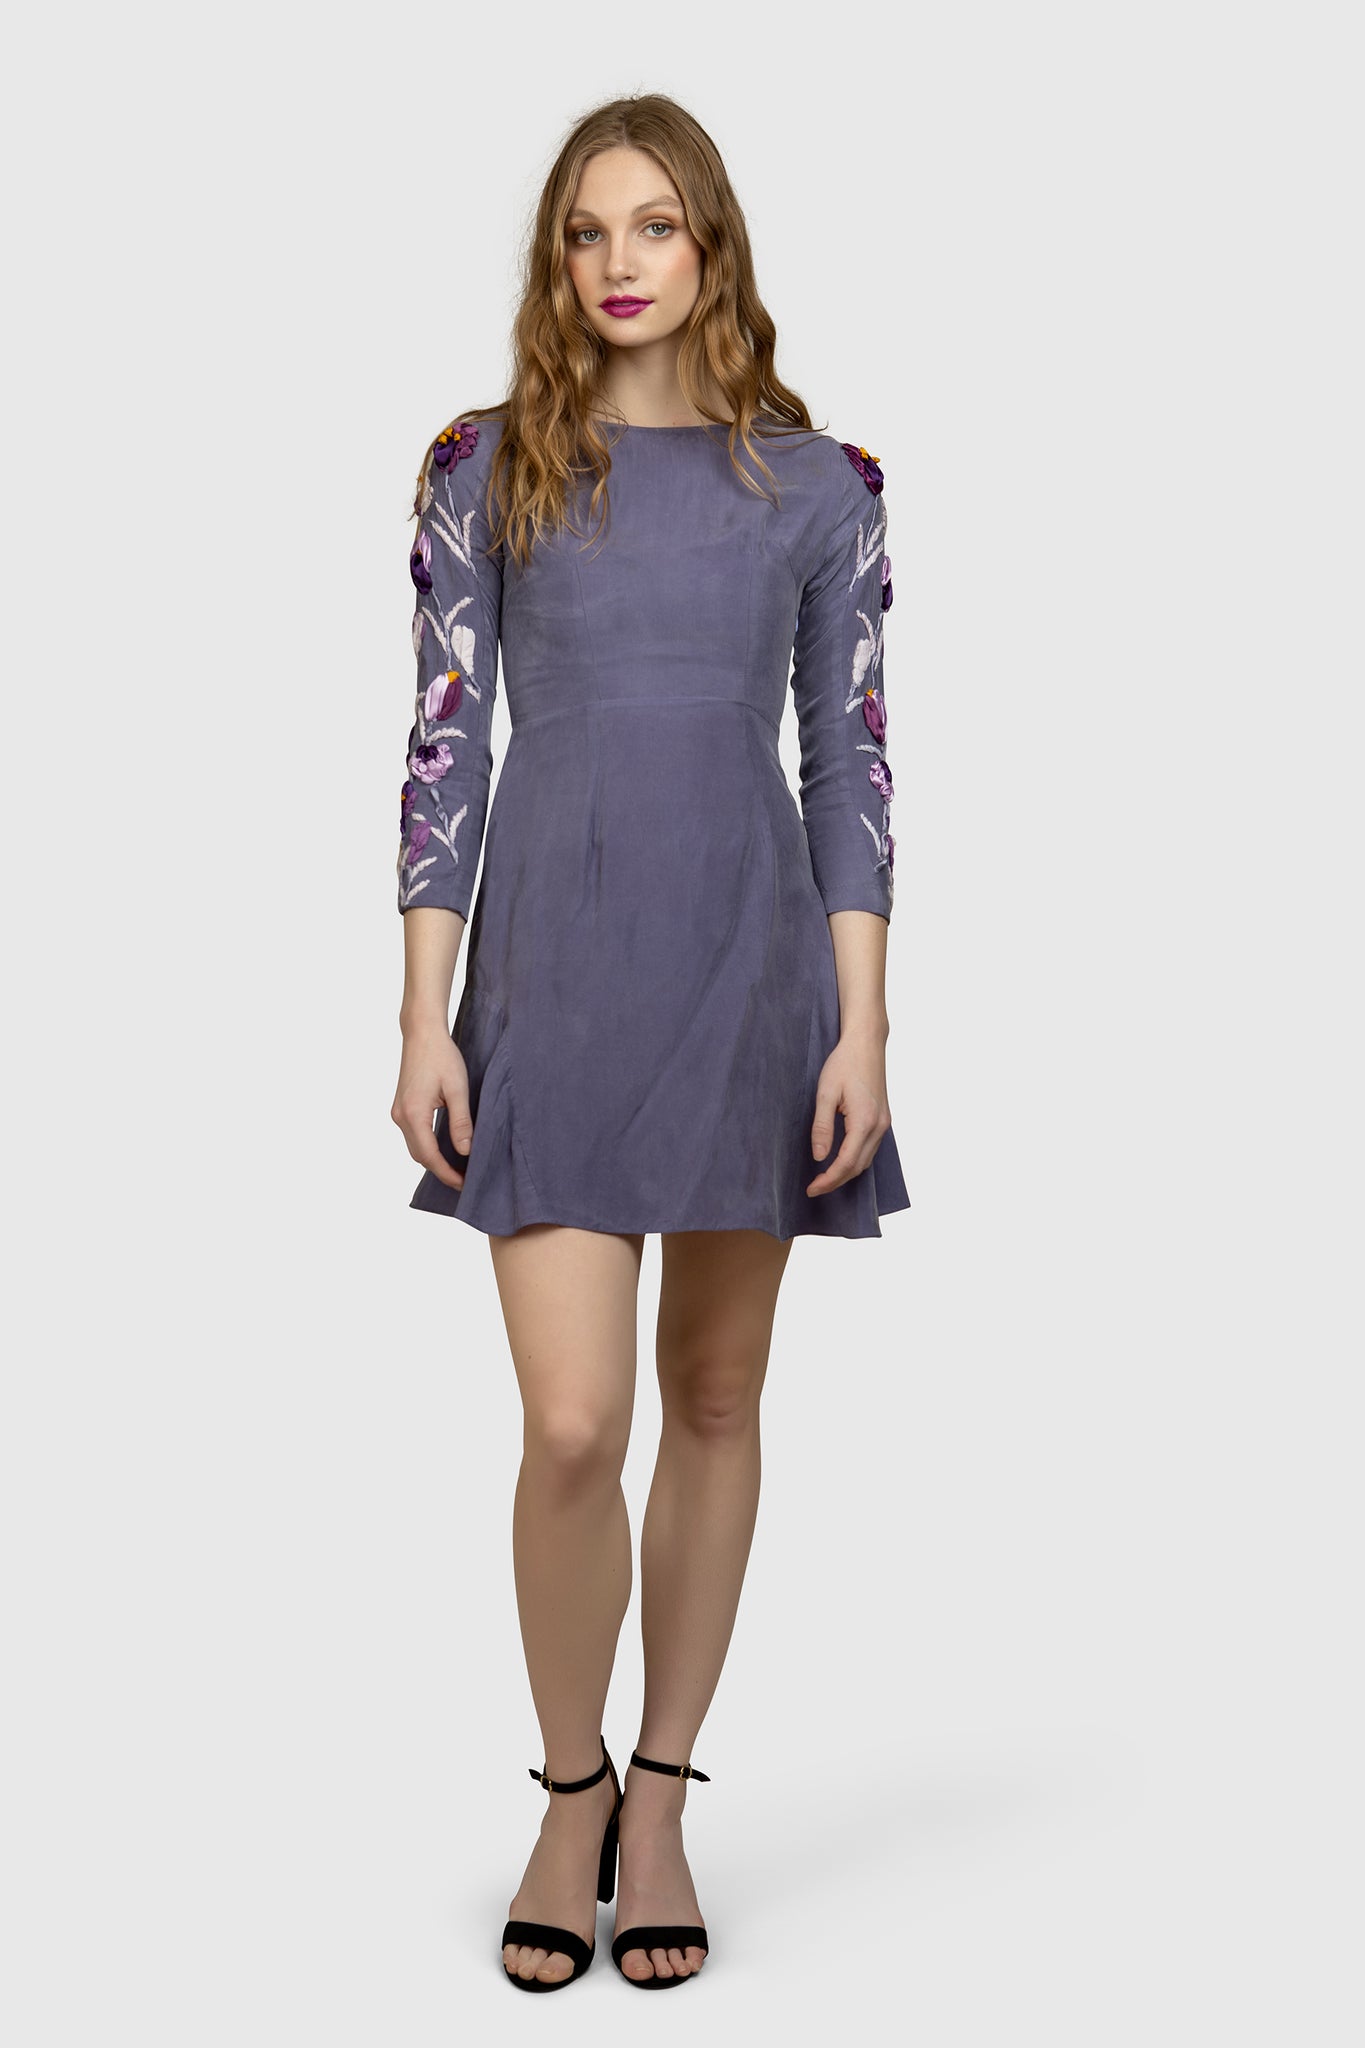 Made-to-Measure Embroidered Dress - AGAATI